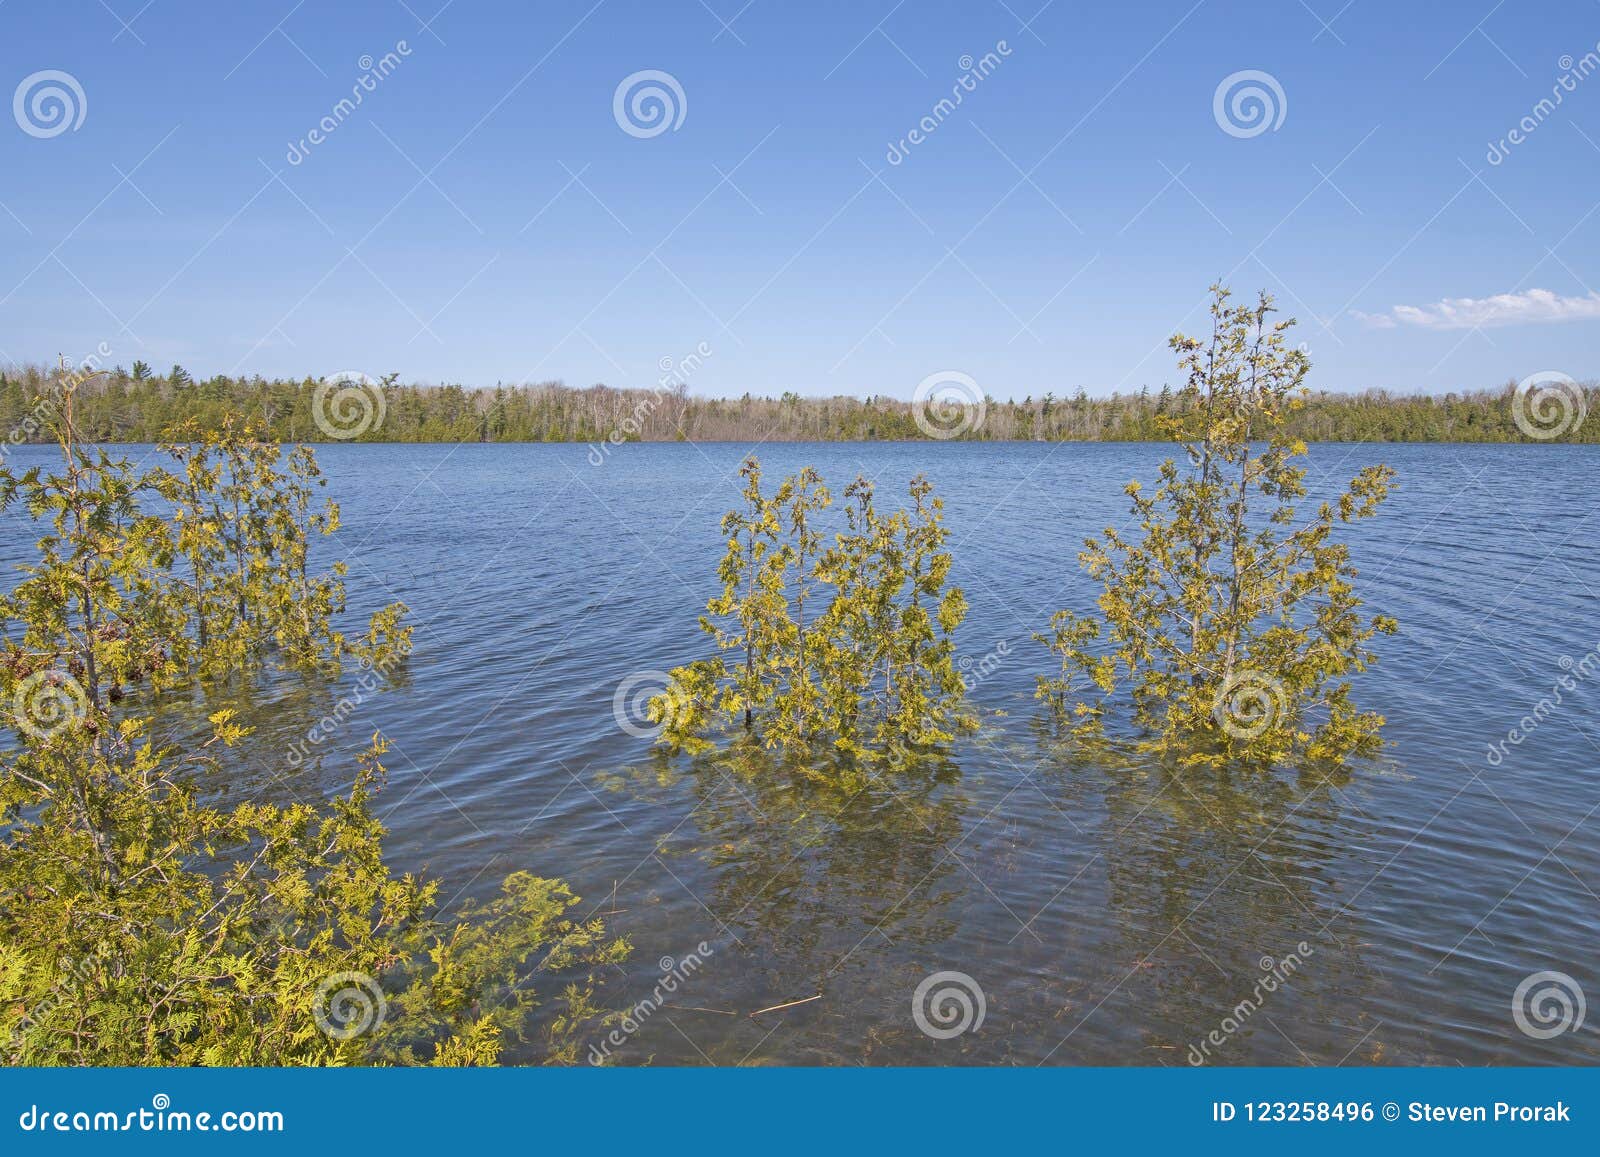 trees in a flooded lake